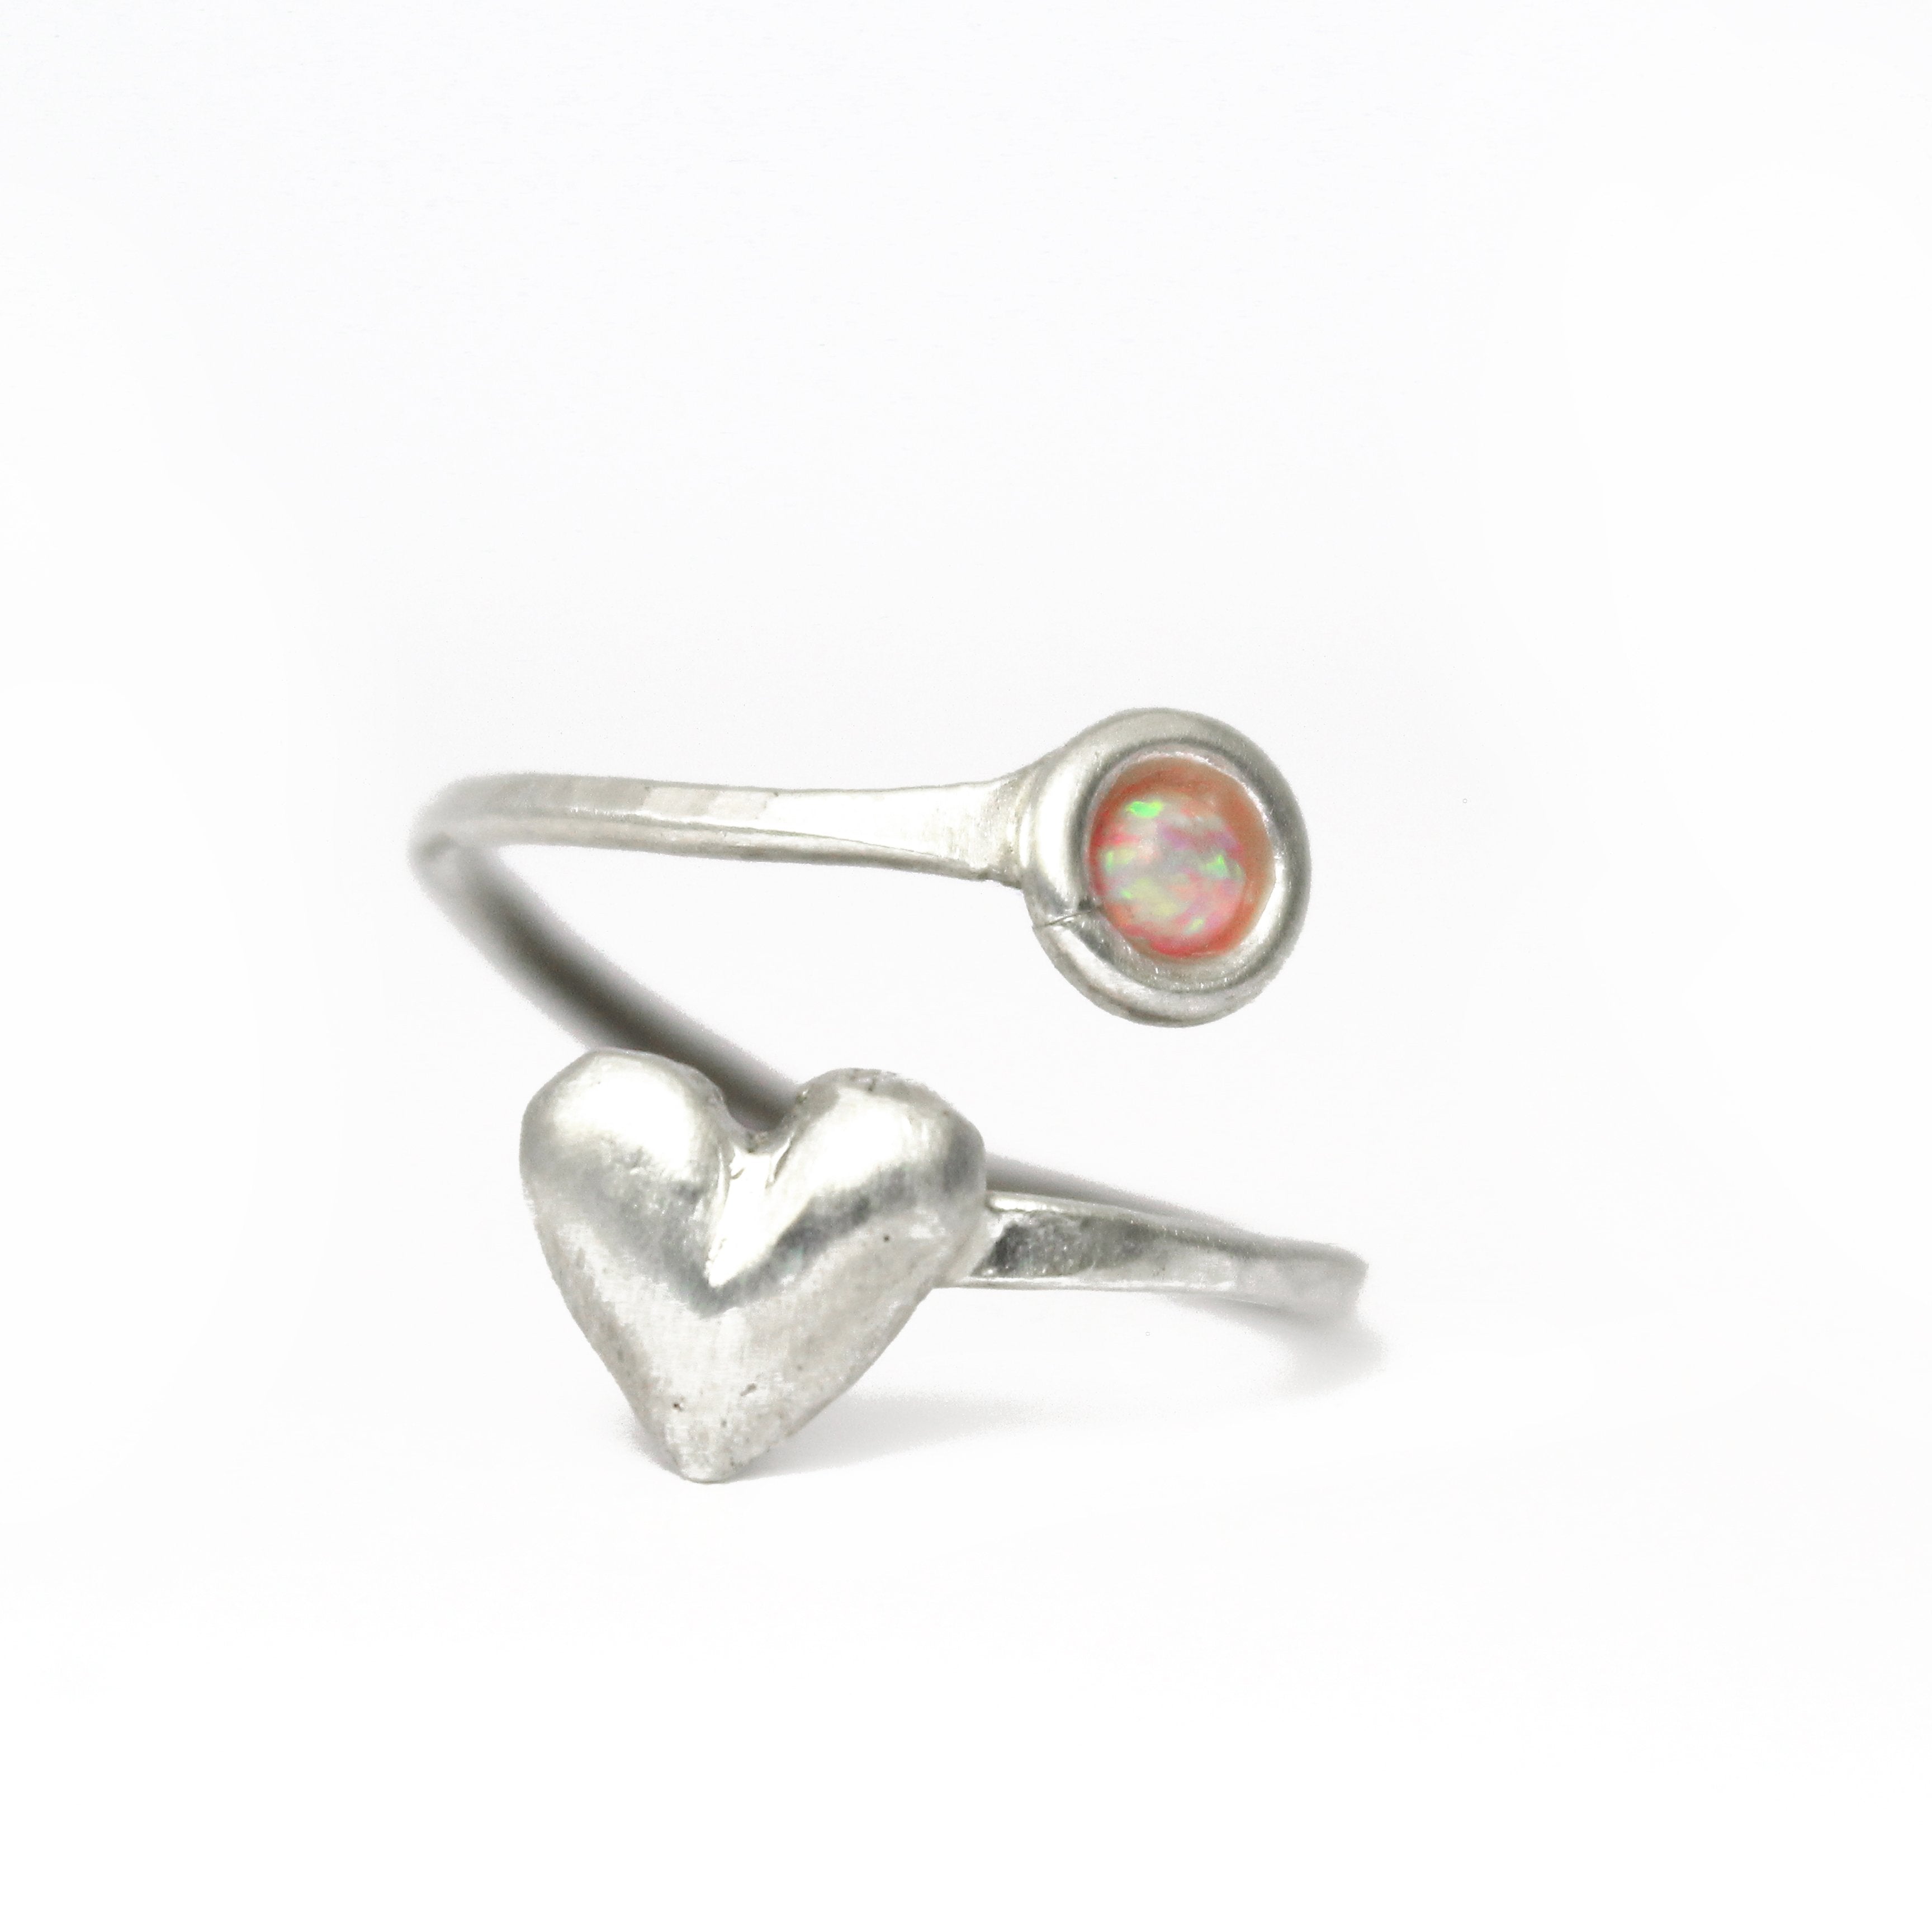 Heart Silver Ring with Opal - Shulamit Kanter